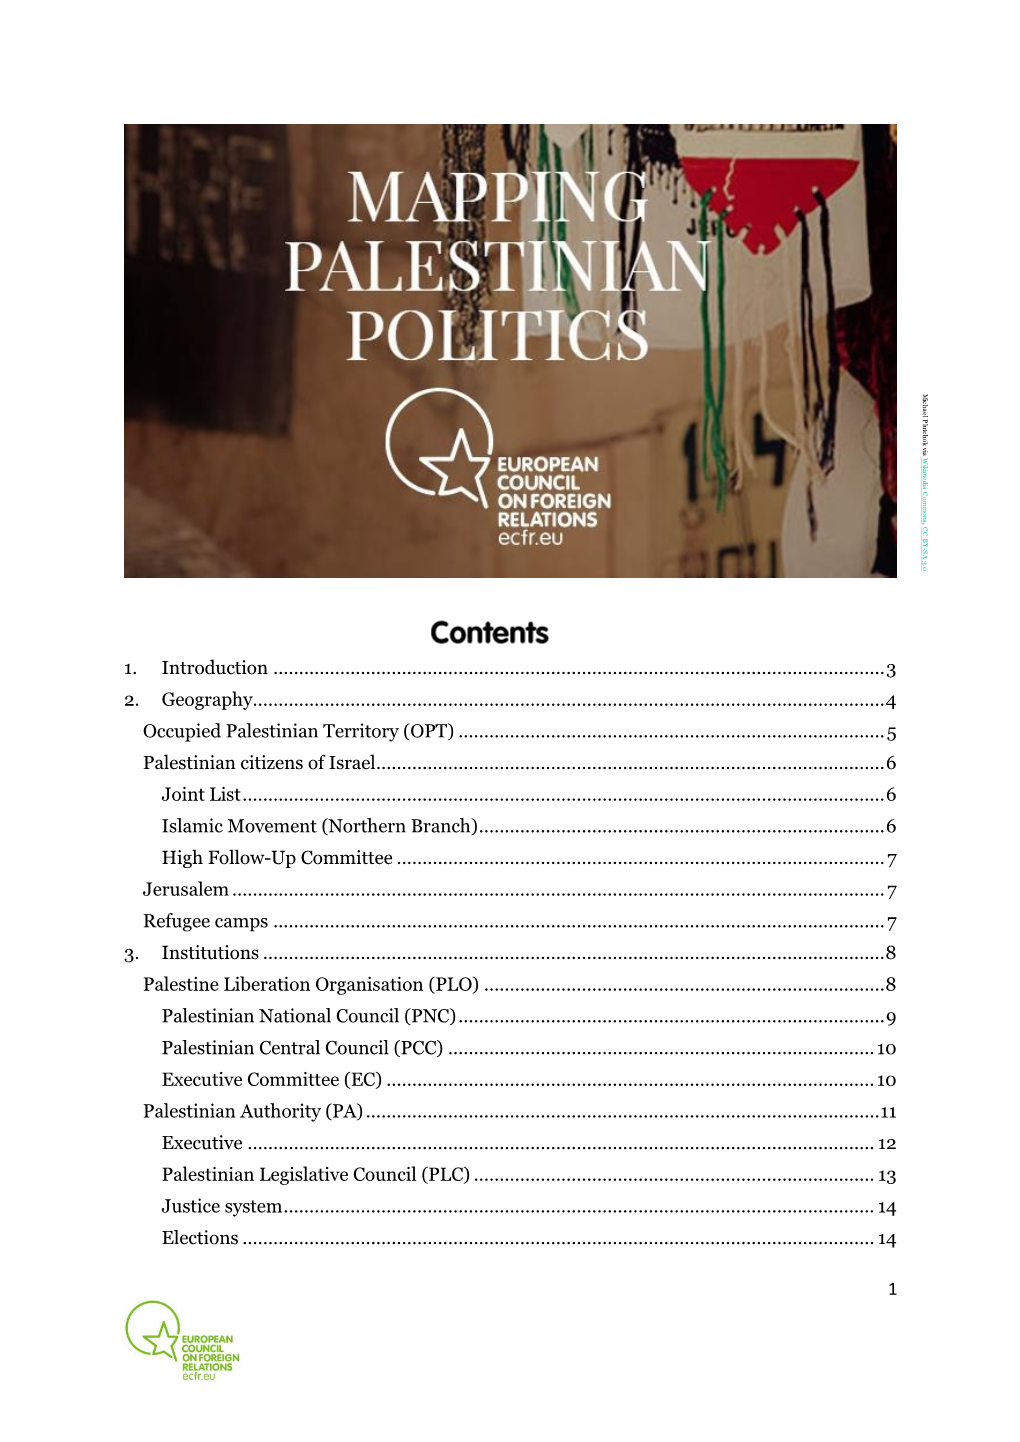 Mapping Palestinian Politics Provides an Interactive Overview of the Main Palestinian Political Institutions and Players in Palestine, Israel, and the Diaspora